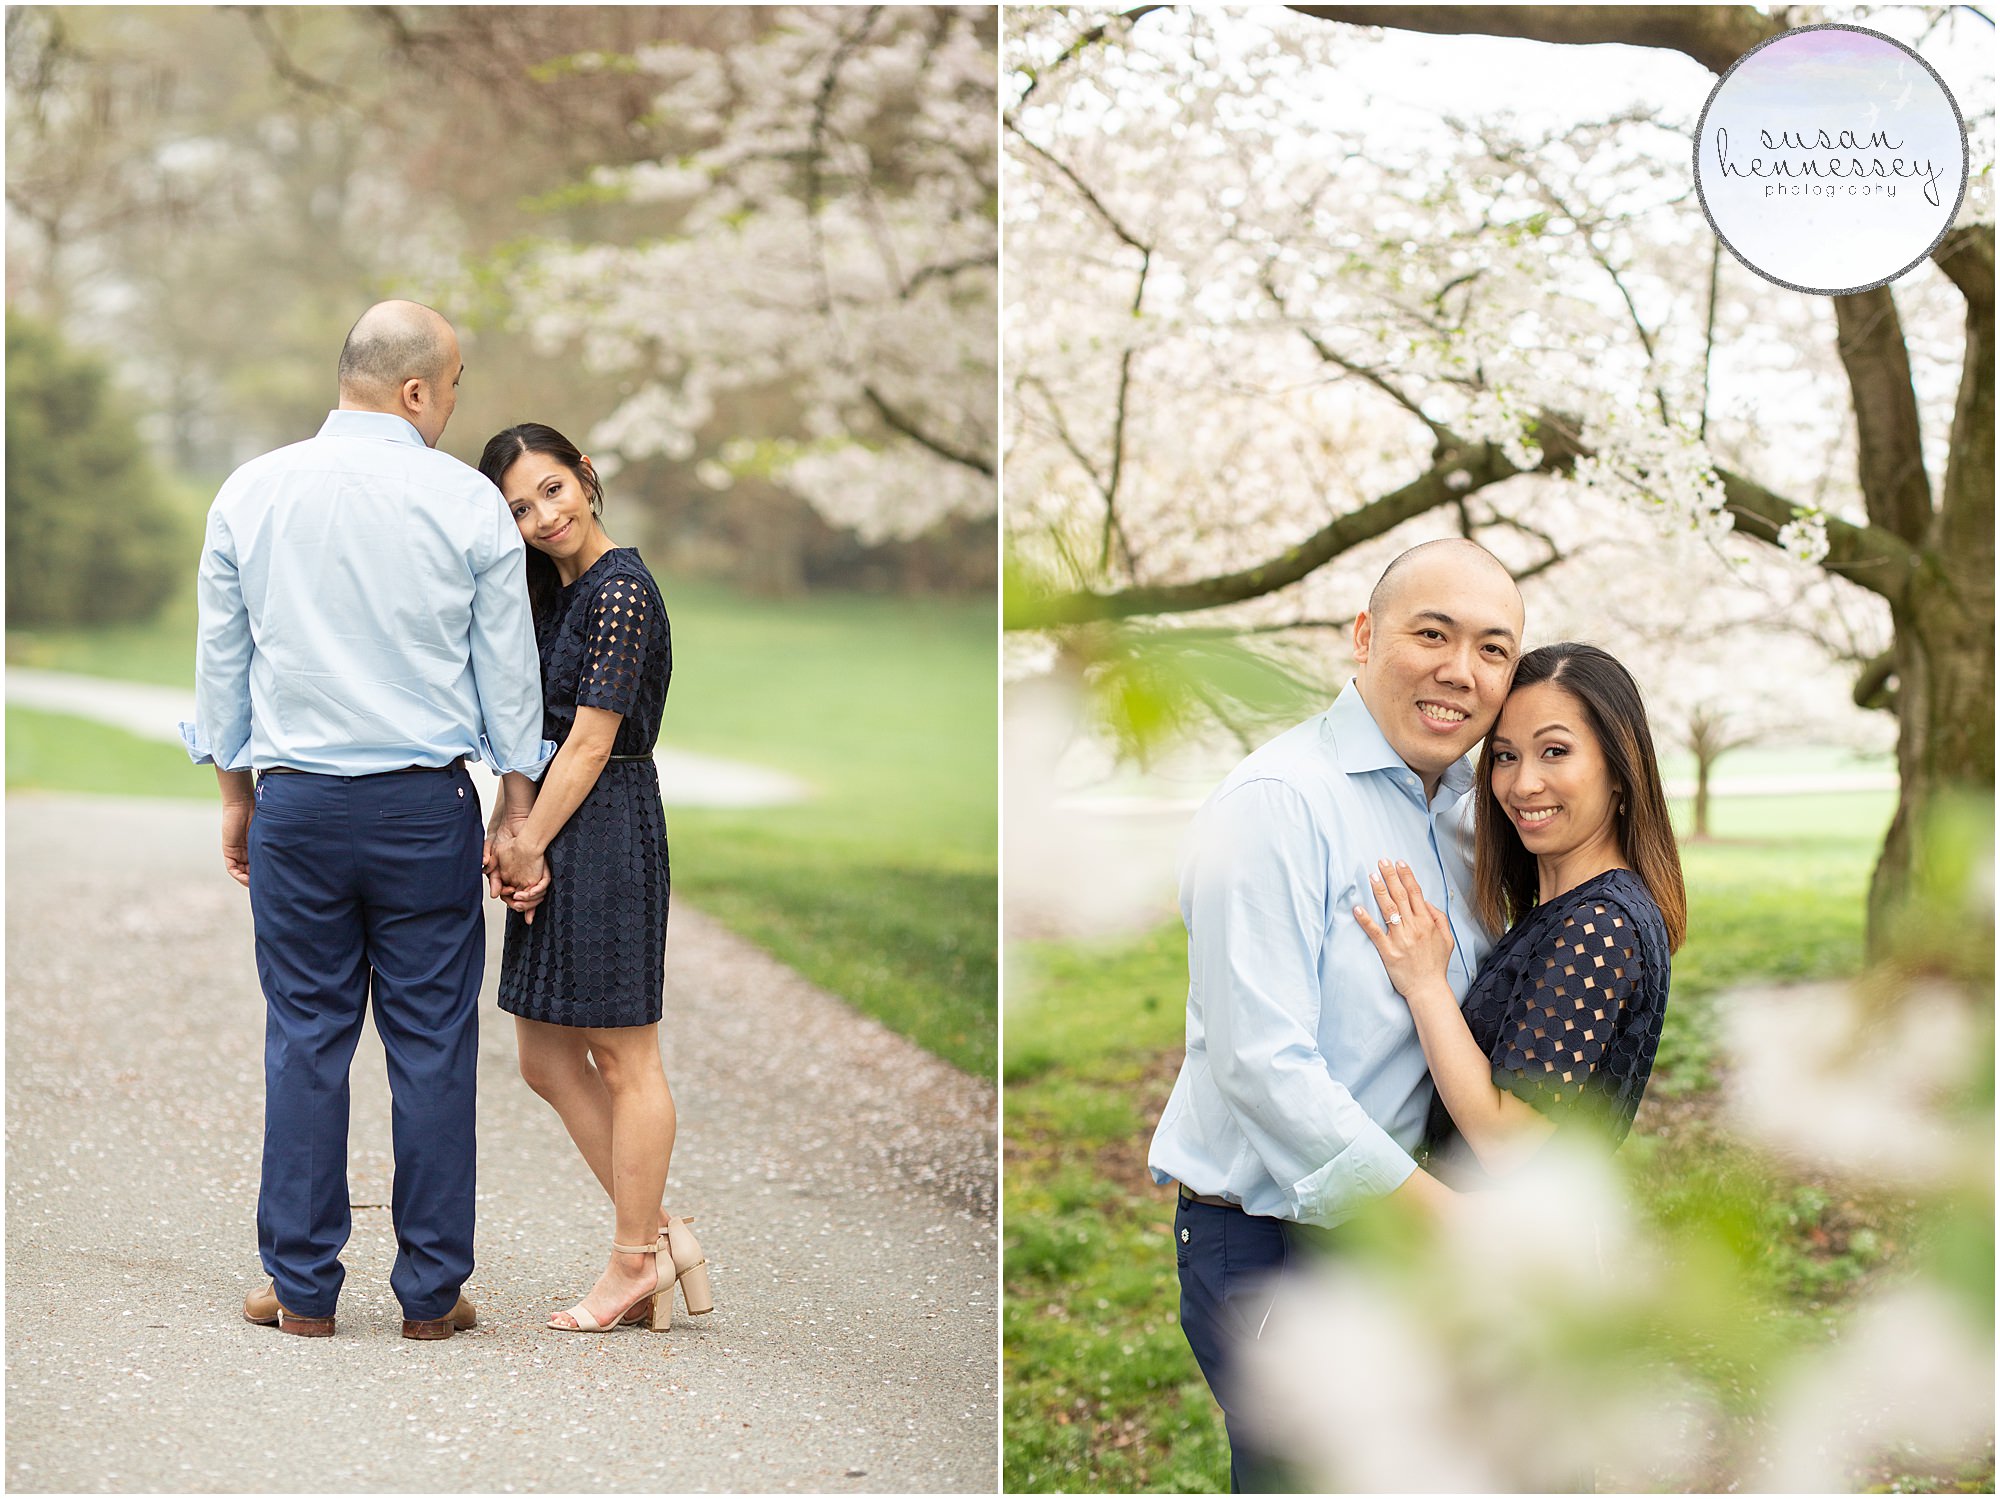 Engagement session at Longwood Gardens during the spring cherry blossoms